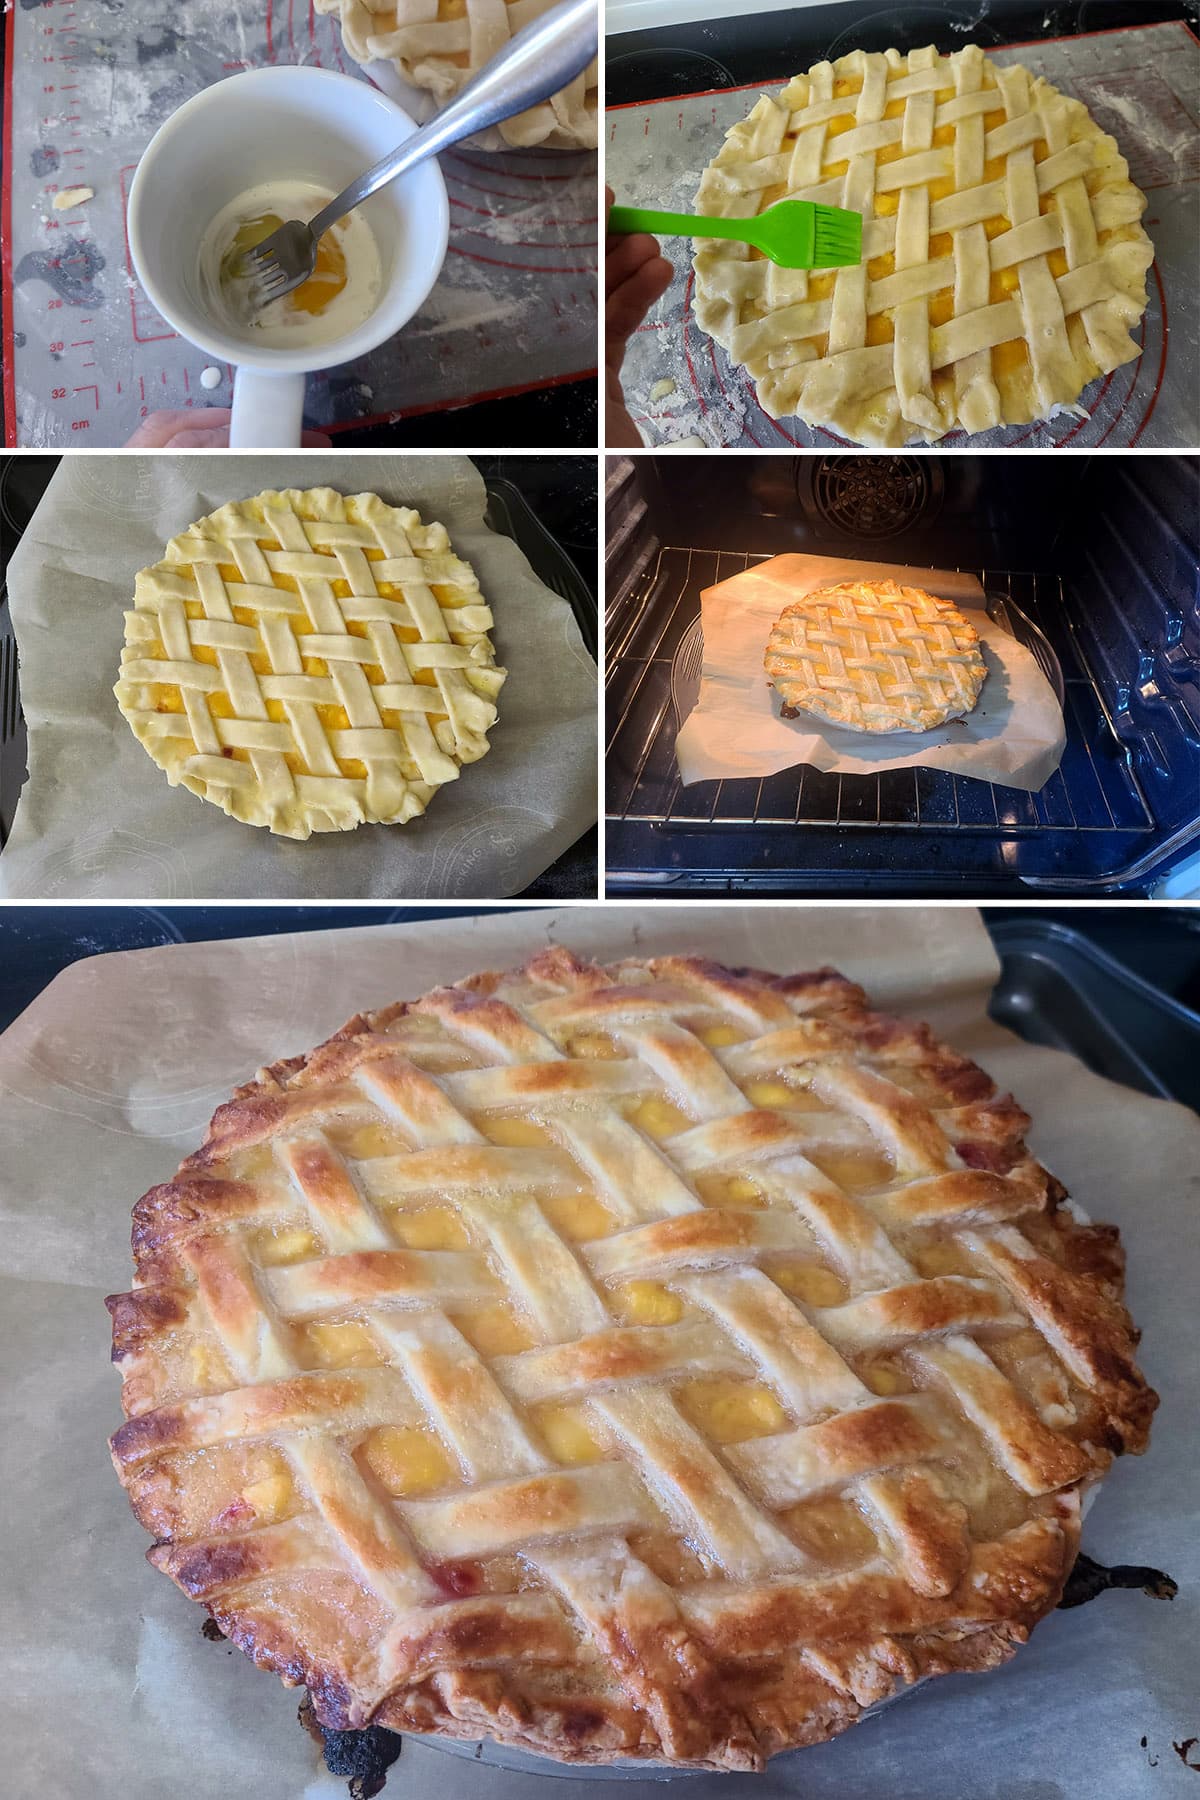 A 5 part image showing the pie being brushed with egg wash and baked.